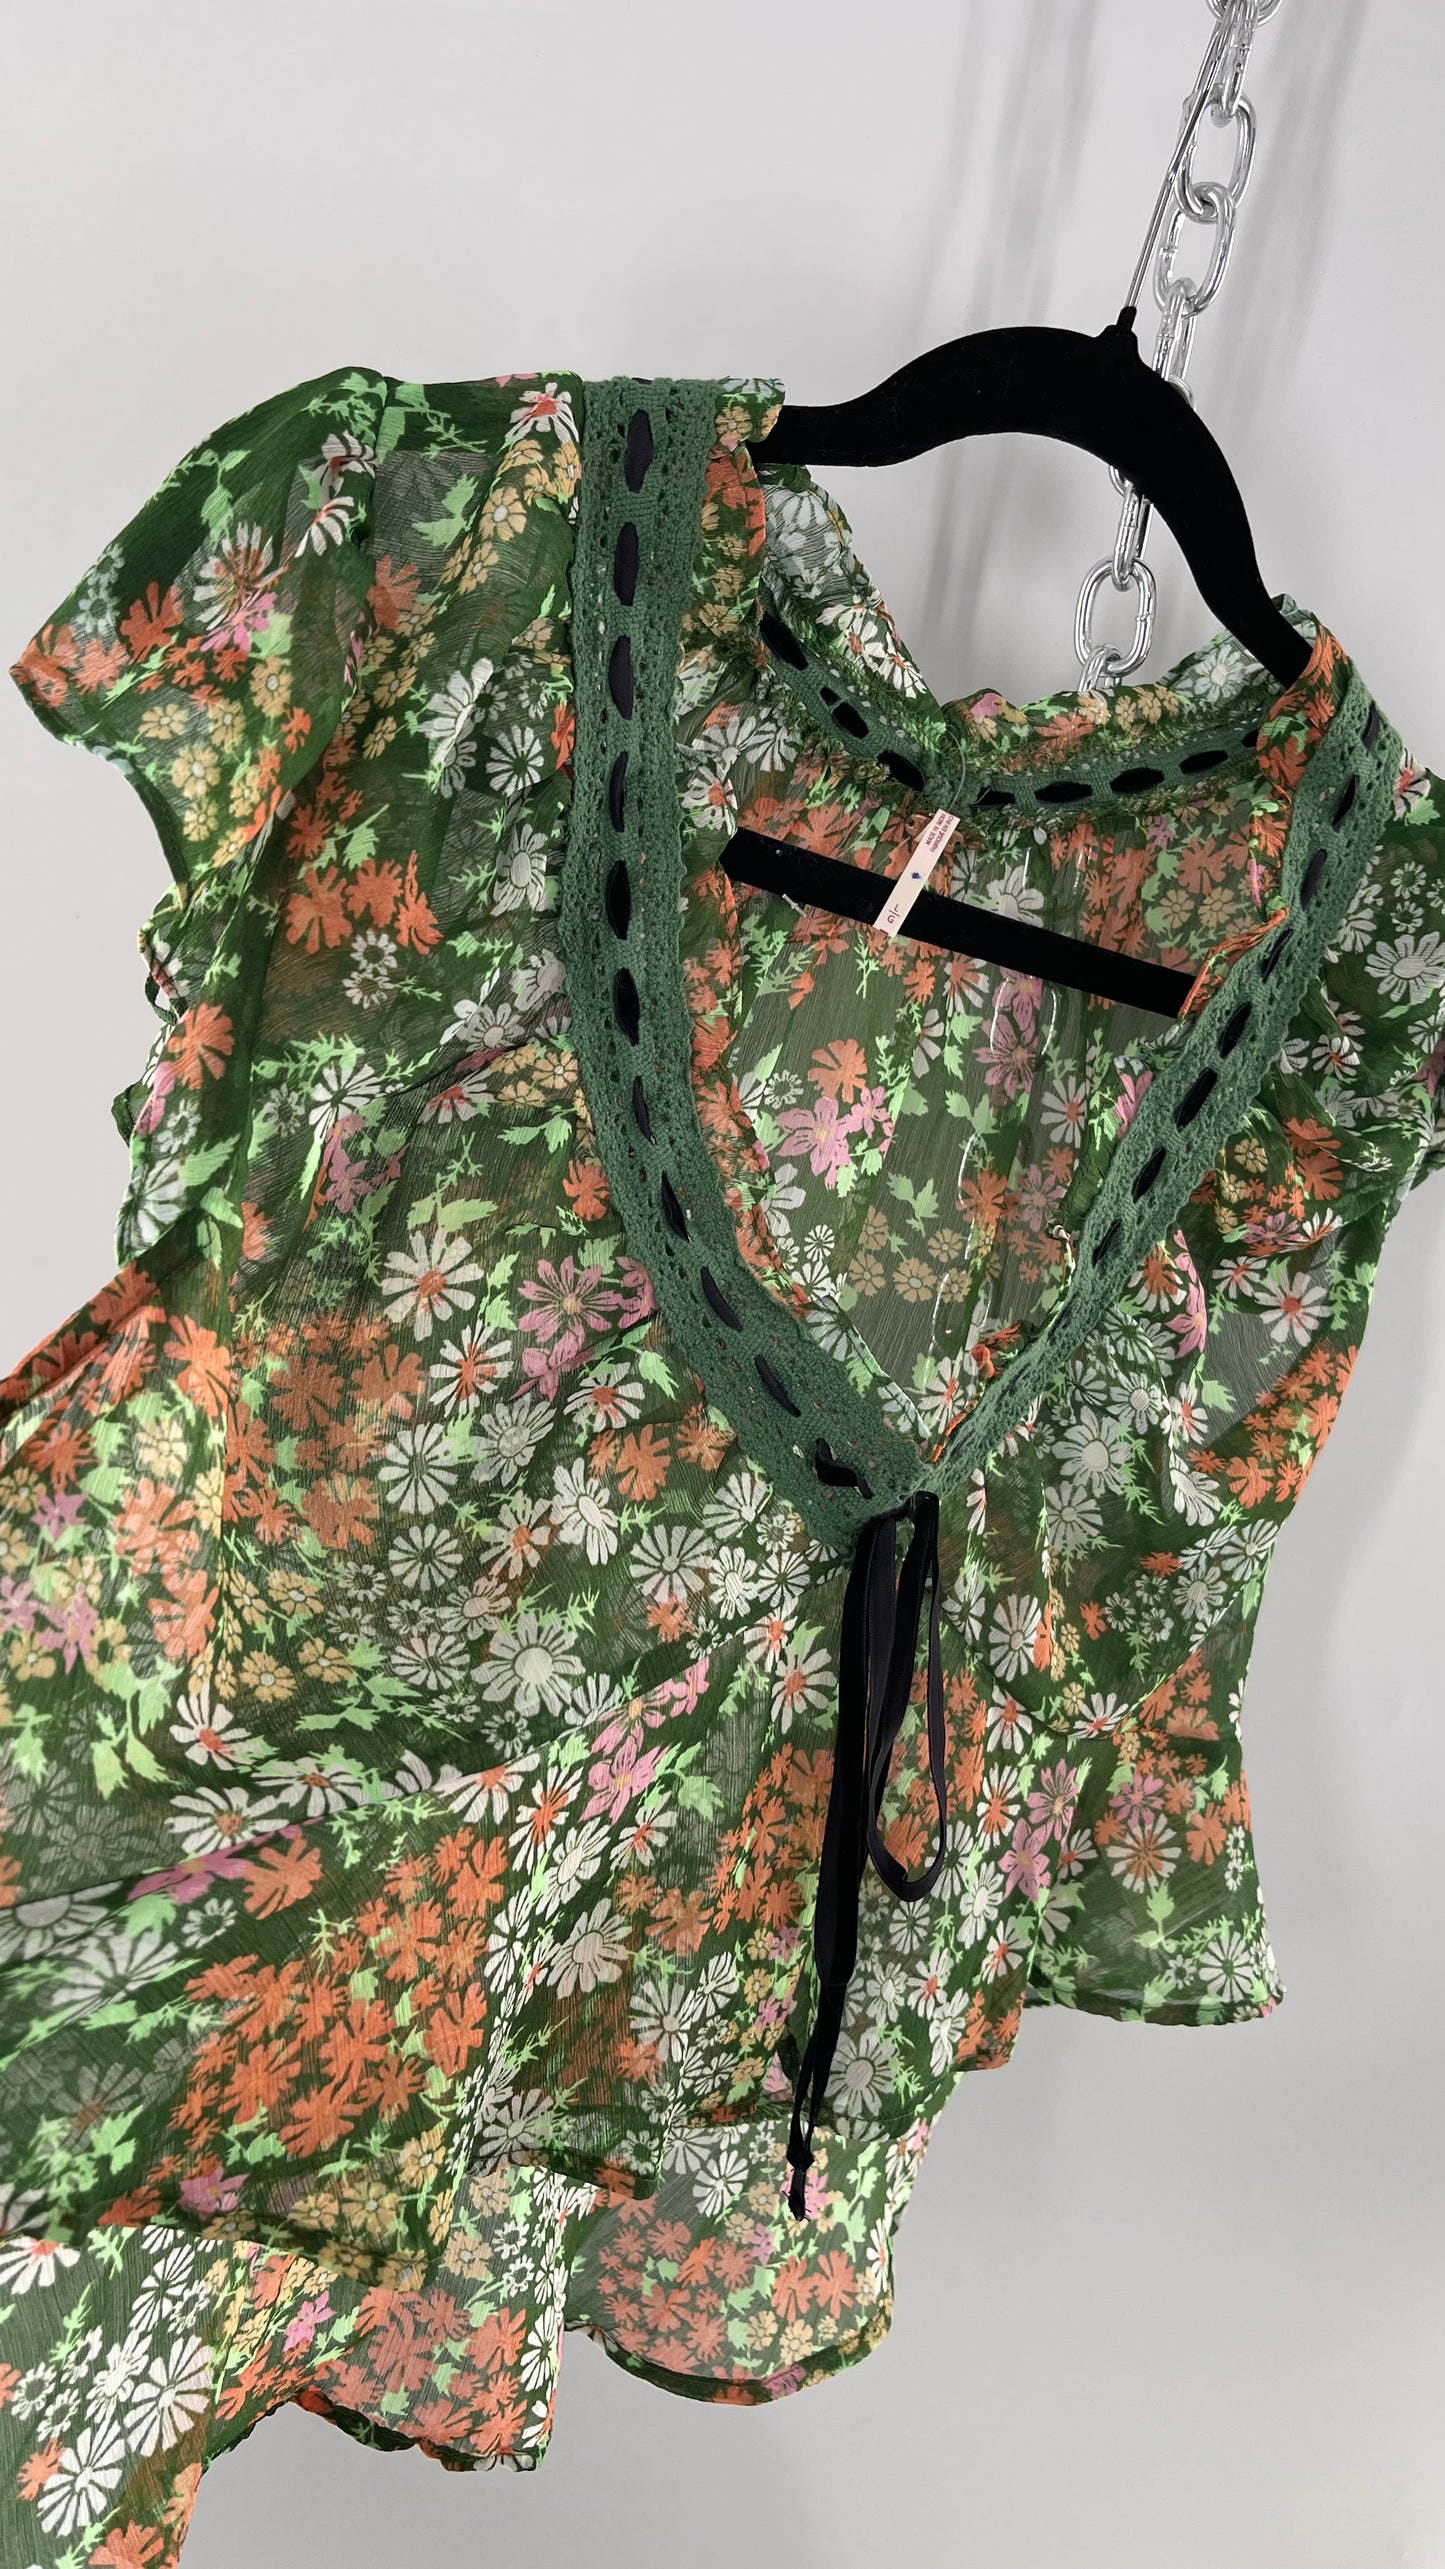 Free People Green Floral Blouse with Green Lace Neckline and Black Velvet Ribbon (Large)